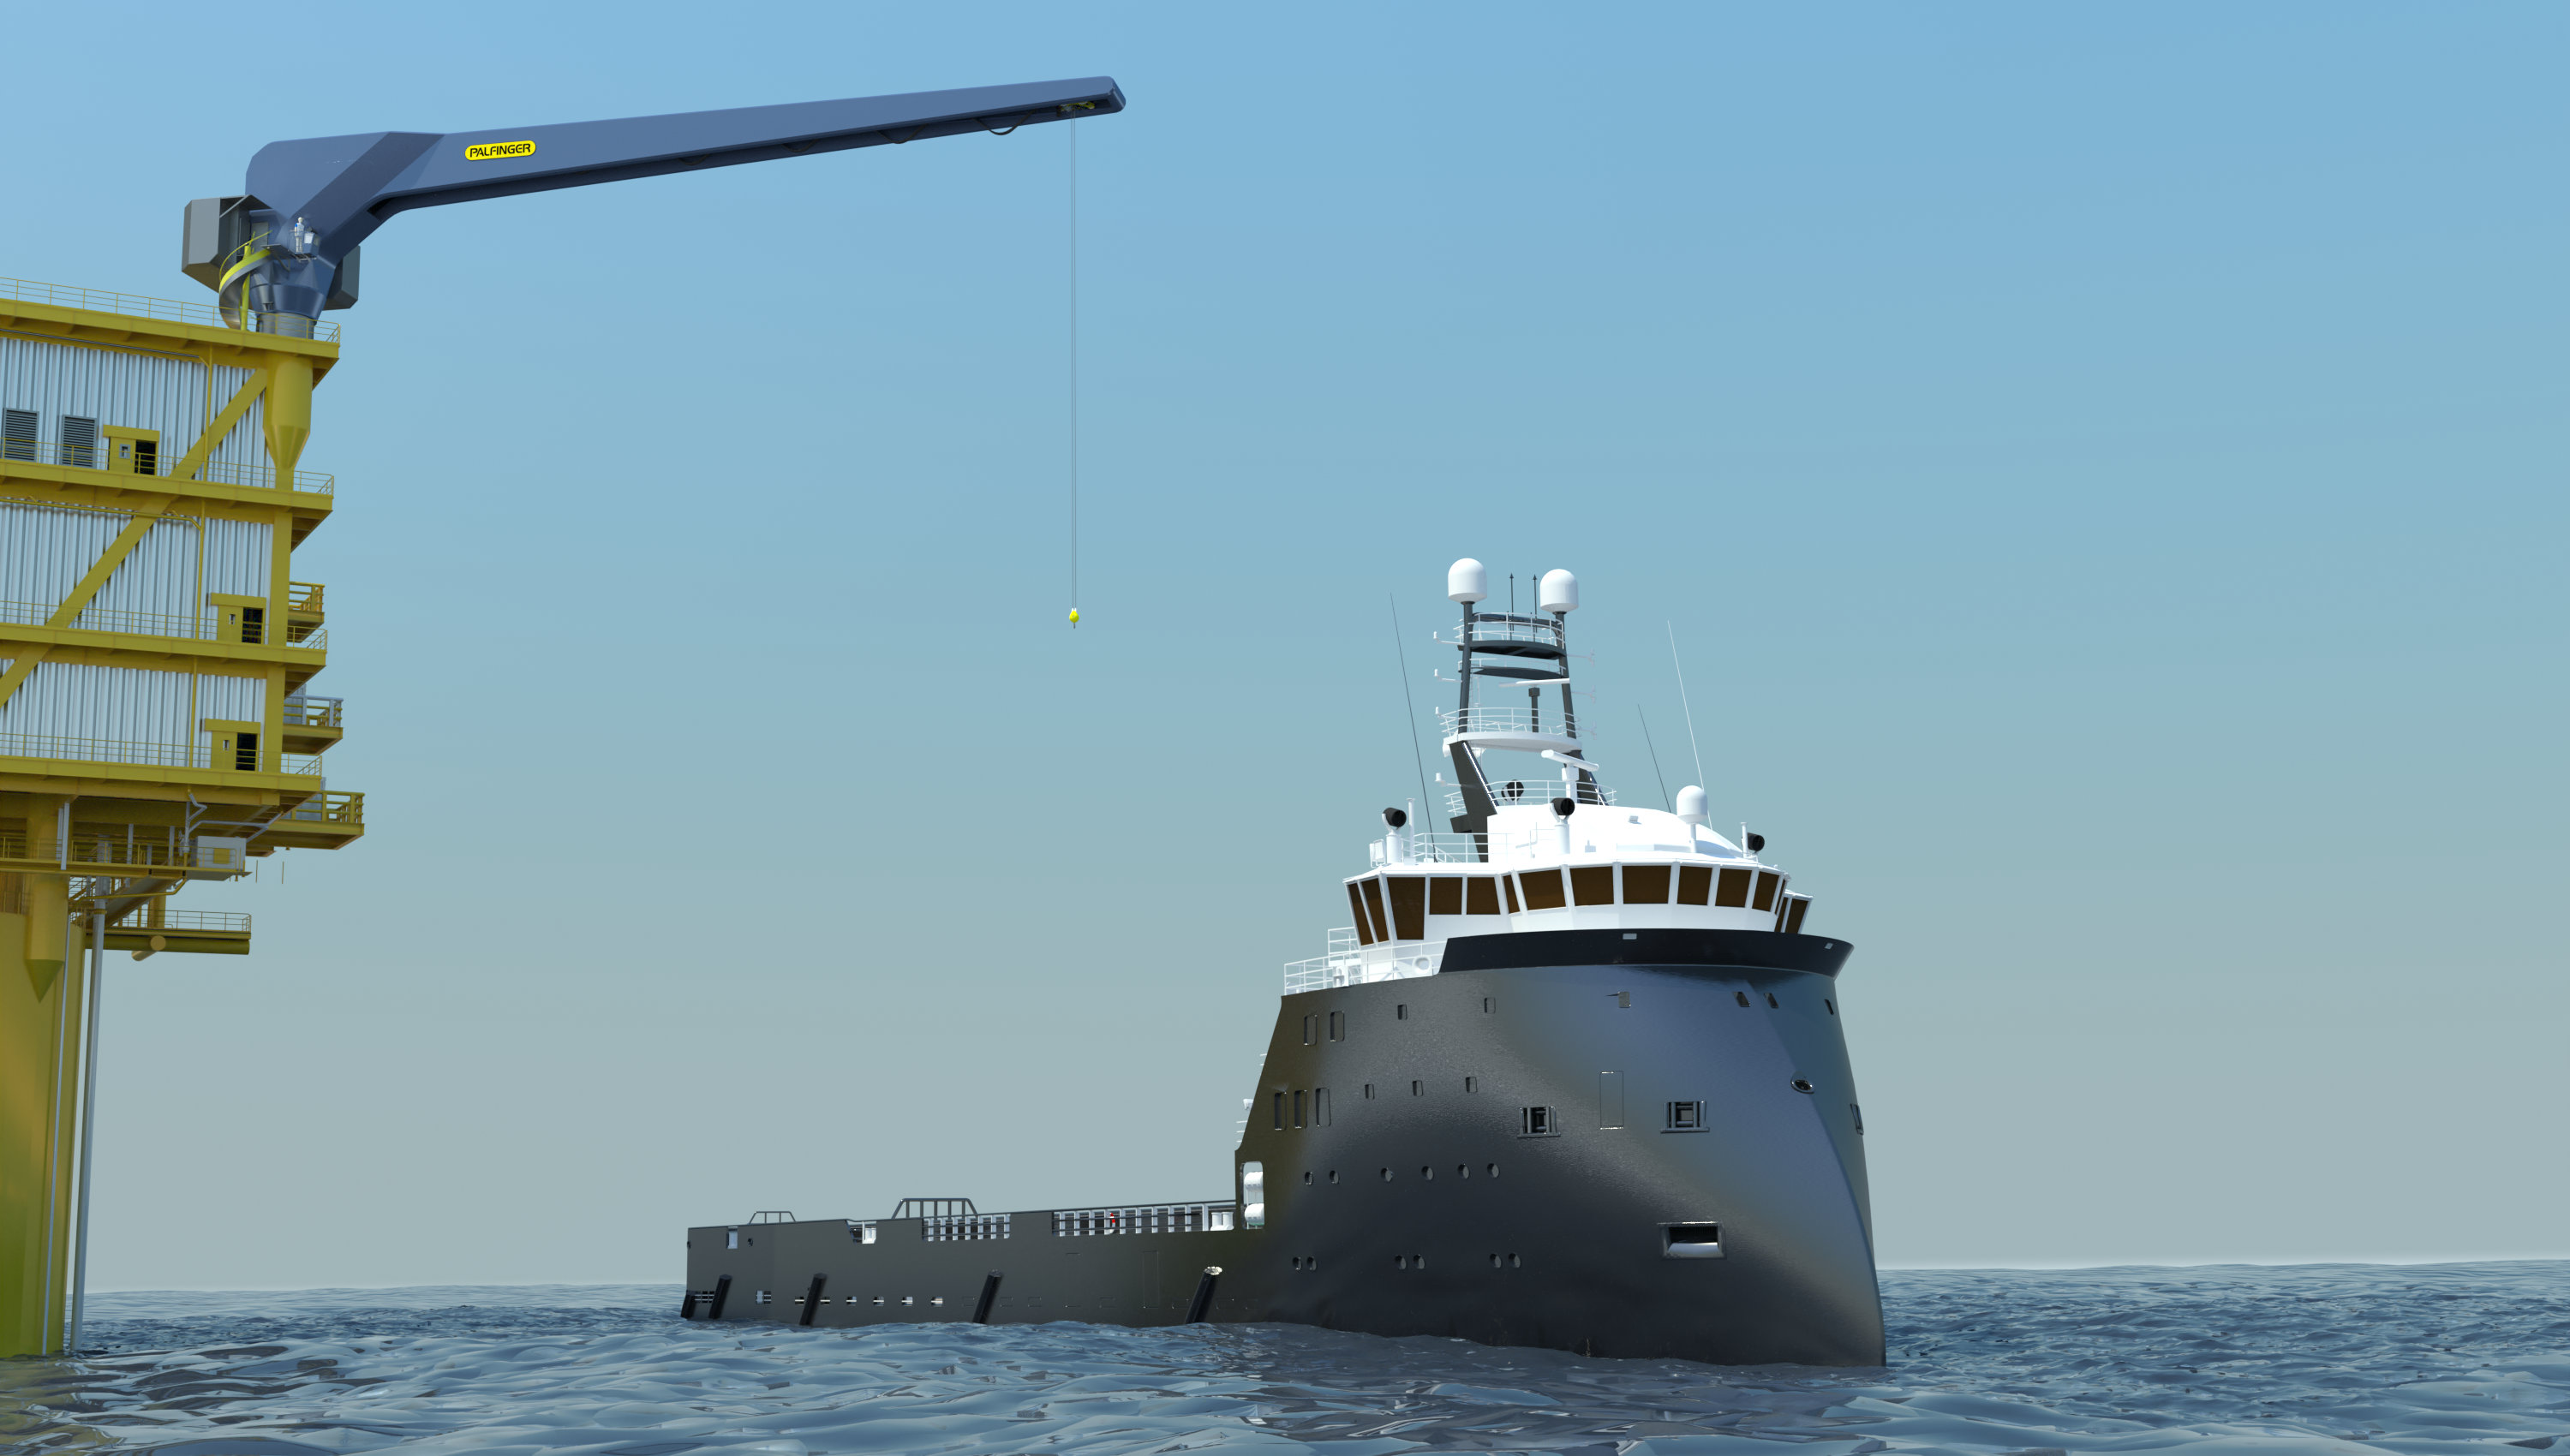 PALFINGER: Remotely Operated Cranes for Norway's Offshore Platforms